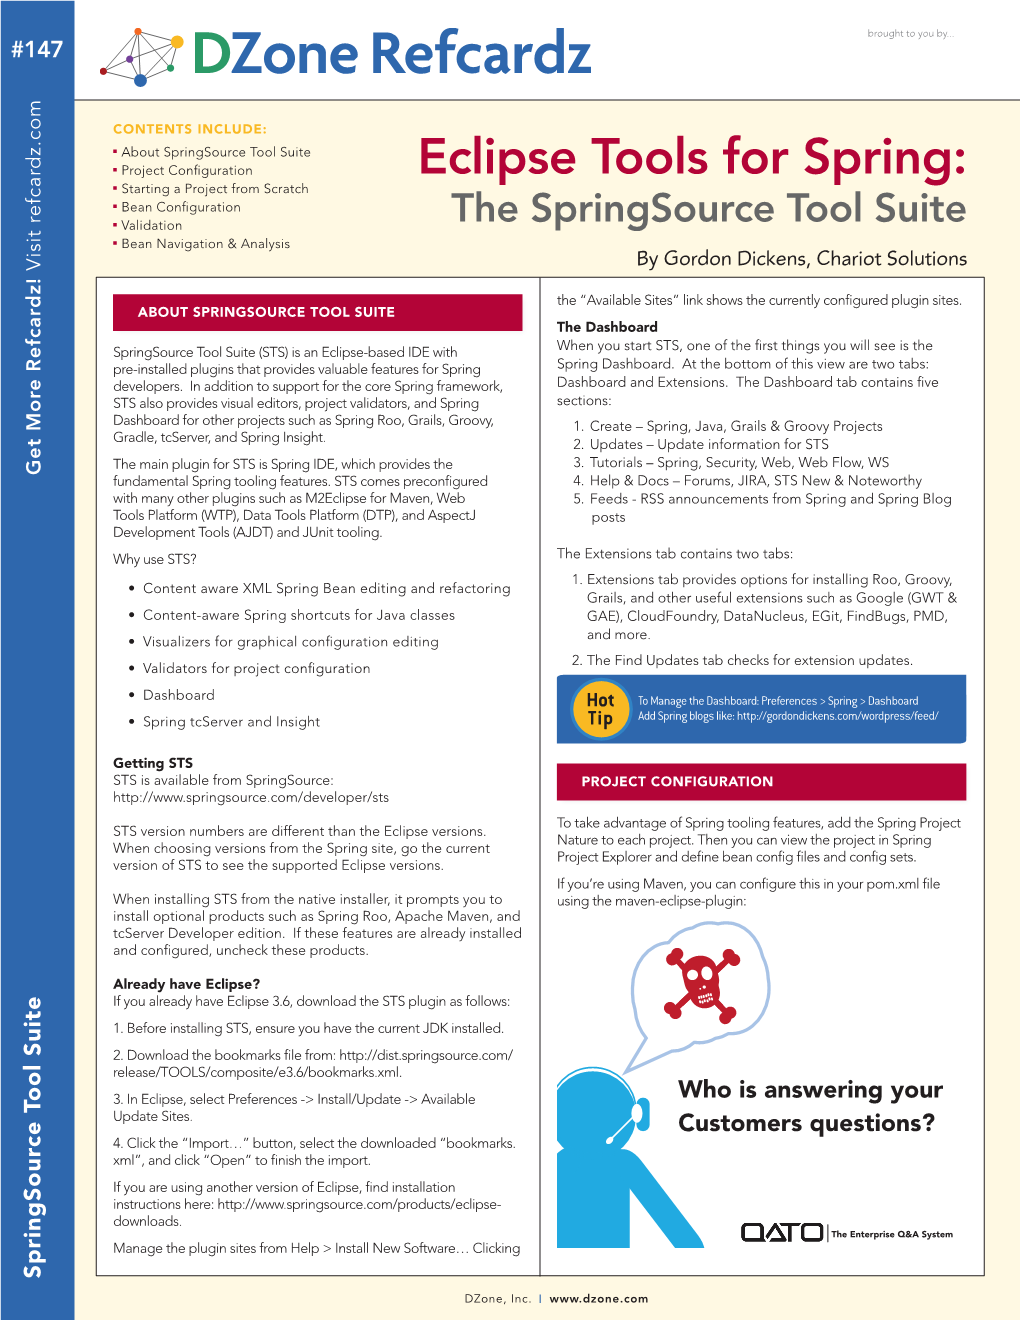 Eclipse Tools for Spring: N Starting a Project from Scratch N Bean Configuration N Validation the Springsource Tool Suite N Bean Navigation & Analysis